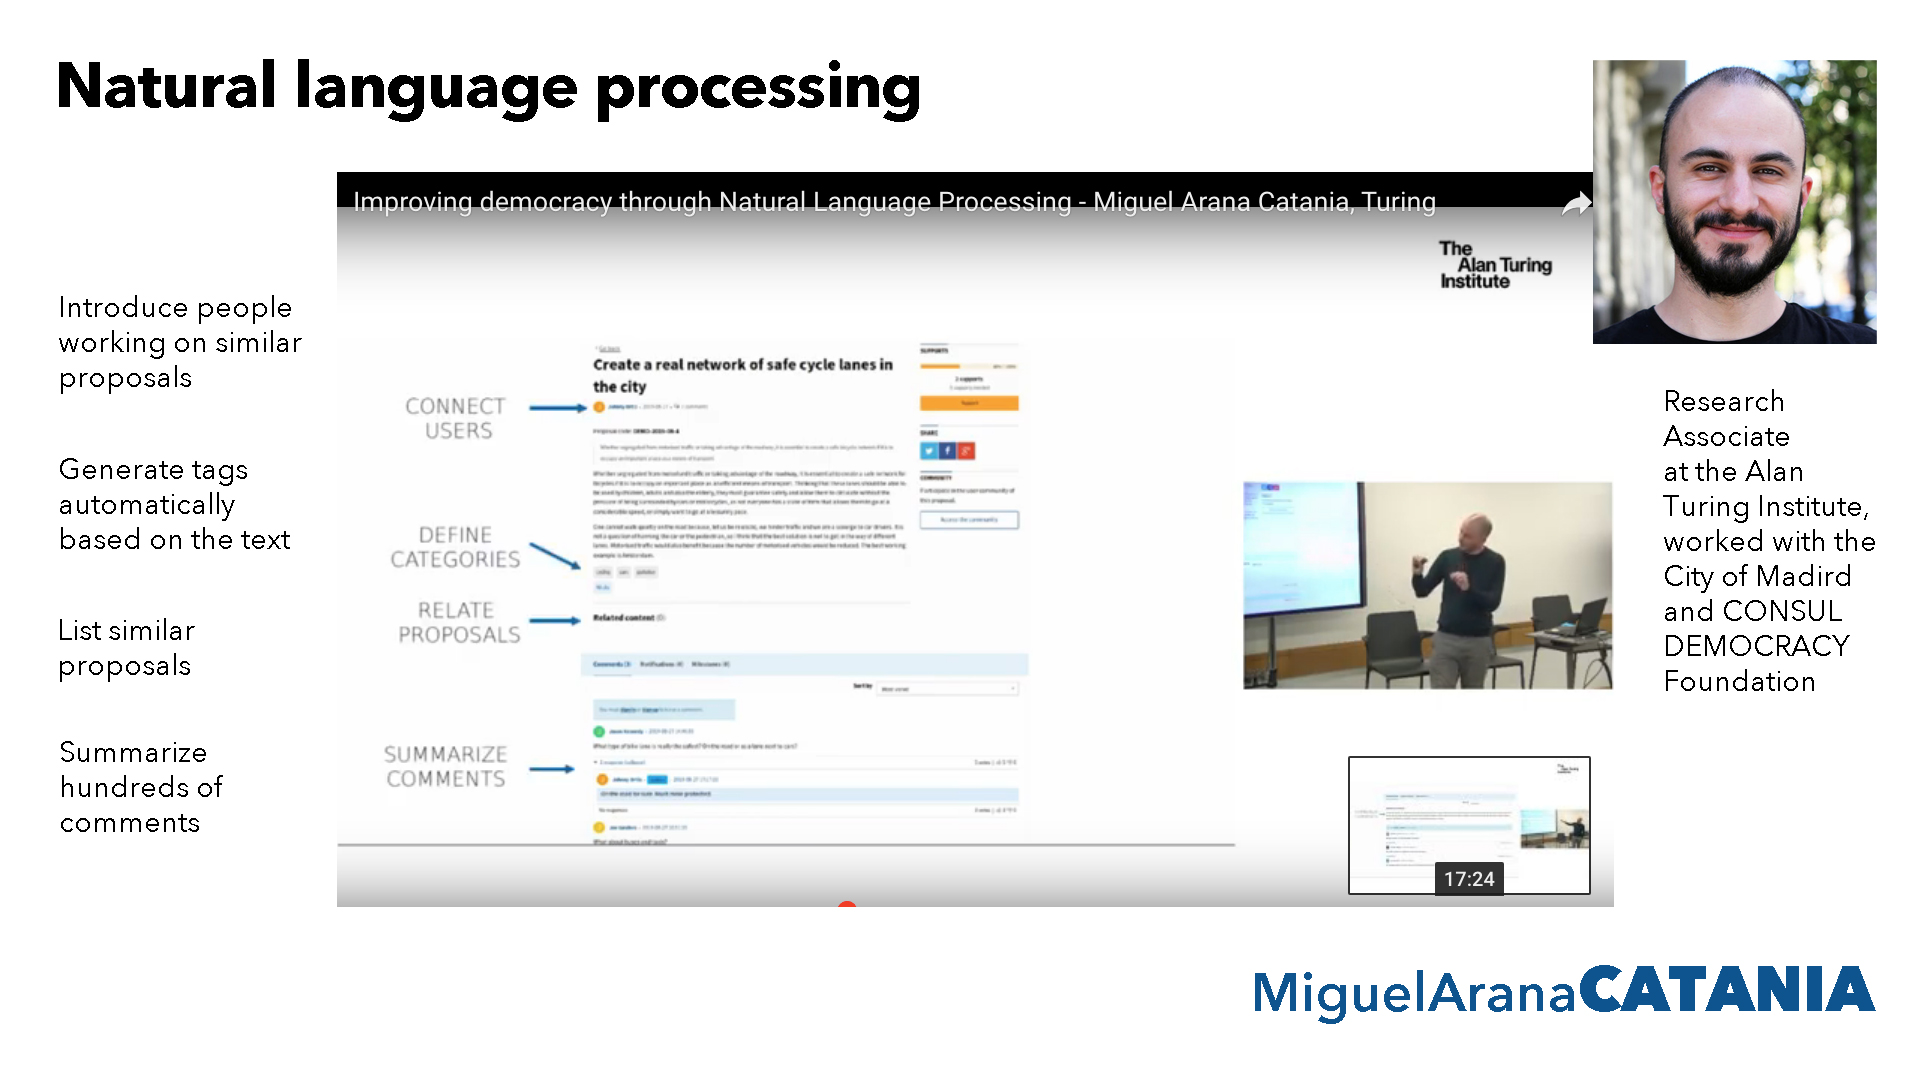 Natural language processing research by Miguel Arana Catania and others at Alan Turing Institute